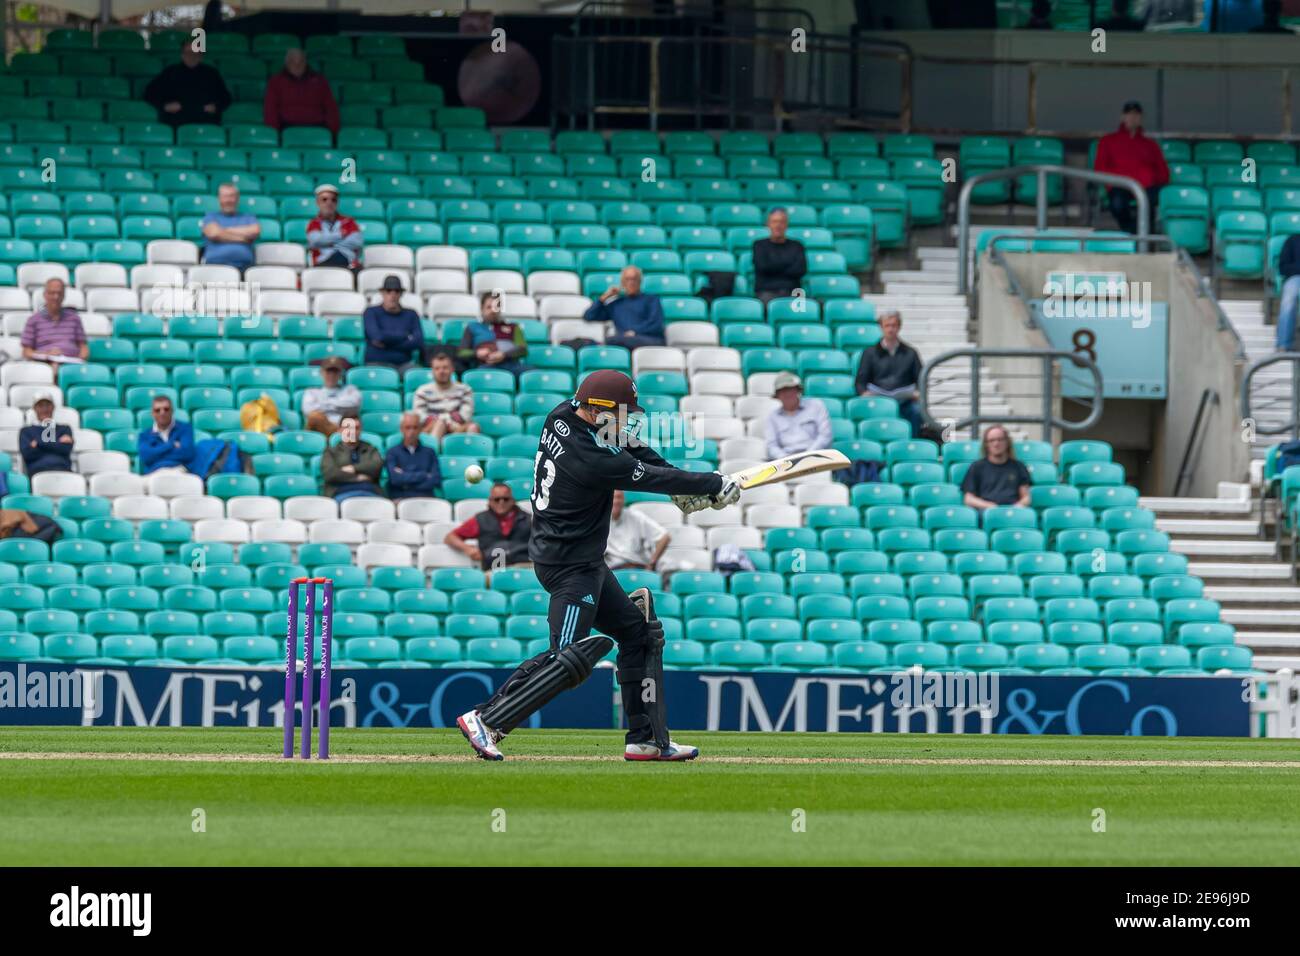 Gareth Batty of Surrey batting against Essex at The Oval against Essex Stock Photo